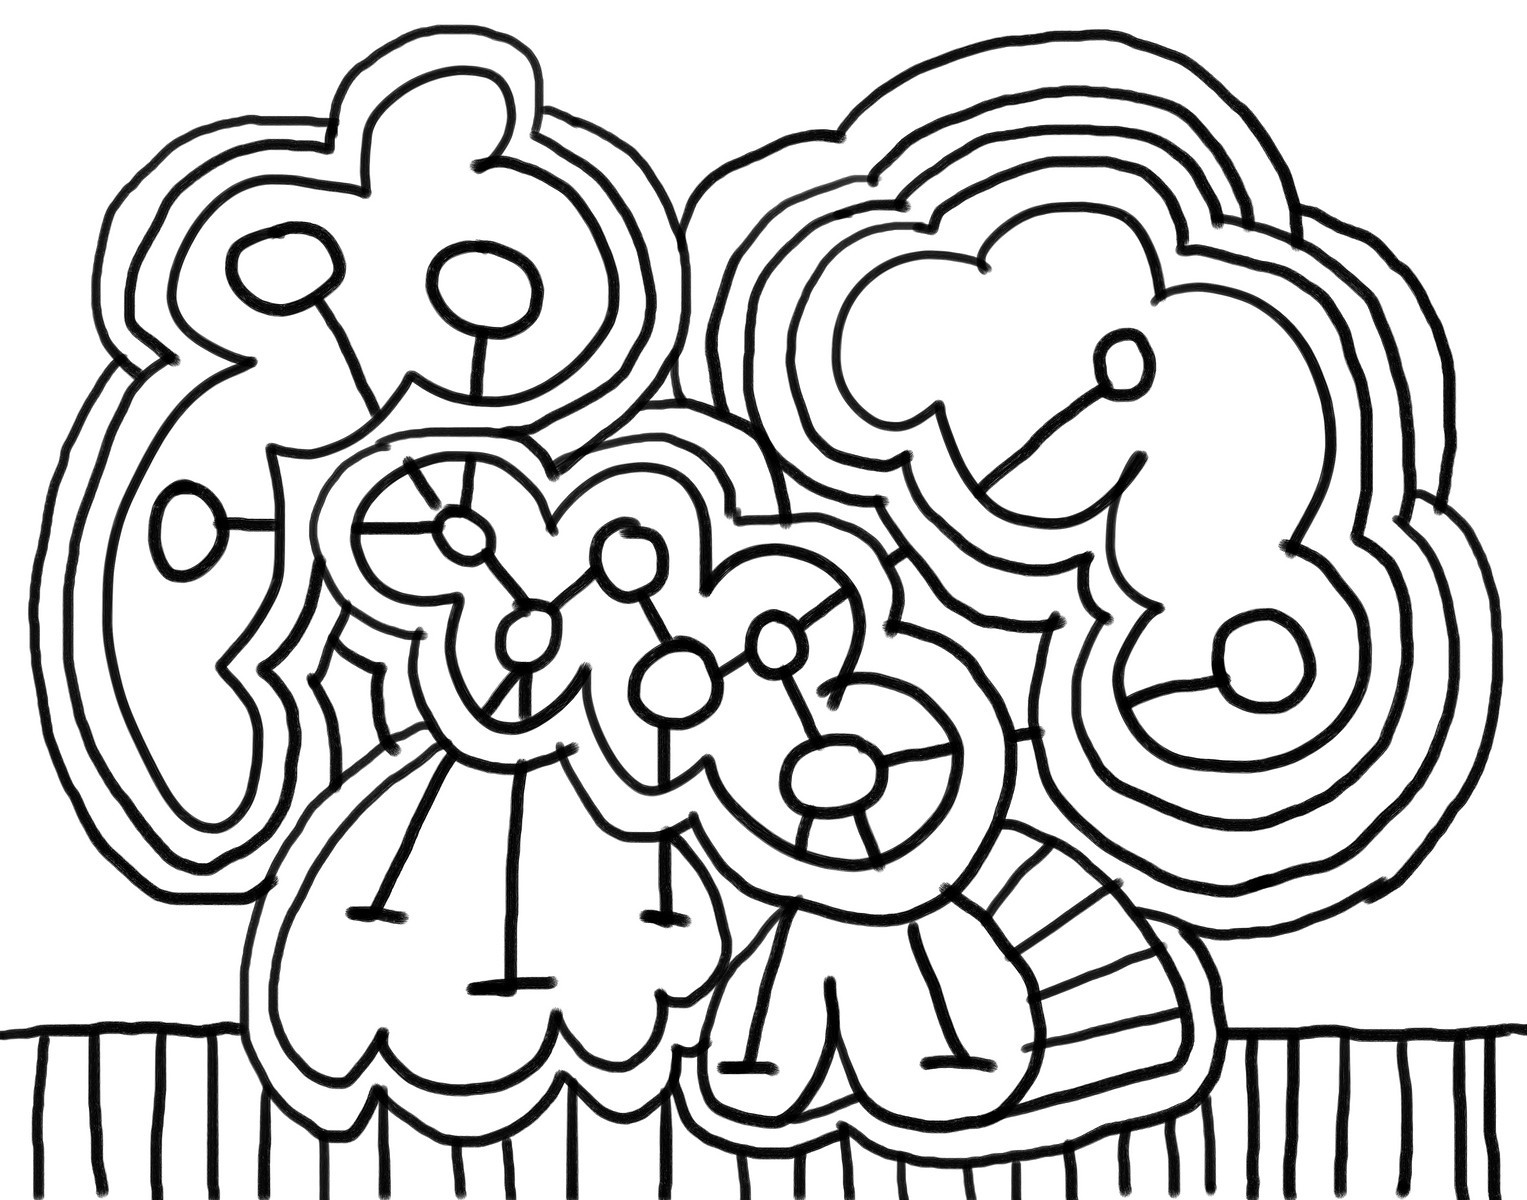 creative coloring sheets creative cats coloring book for adults ginger plaza creative coloring sheets